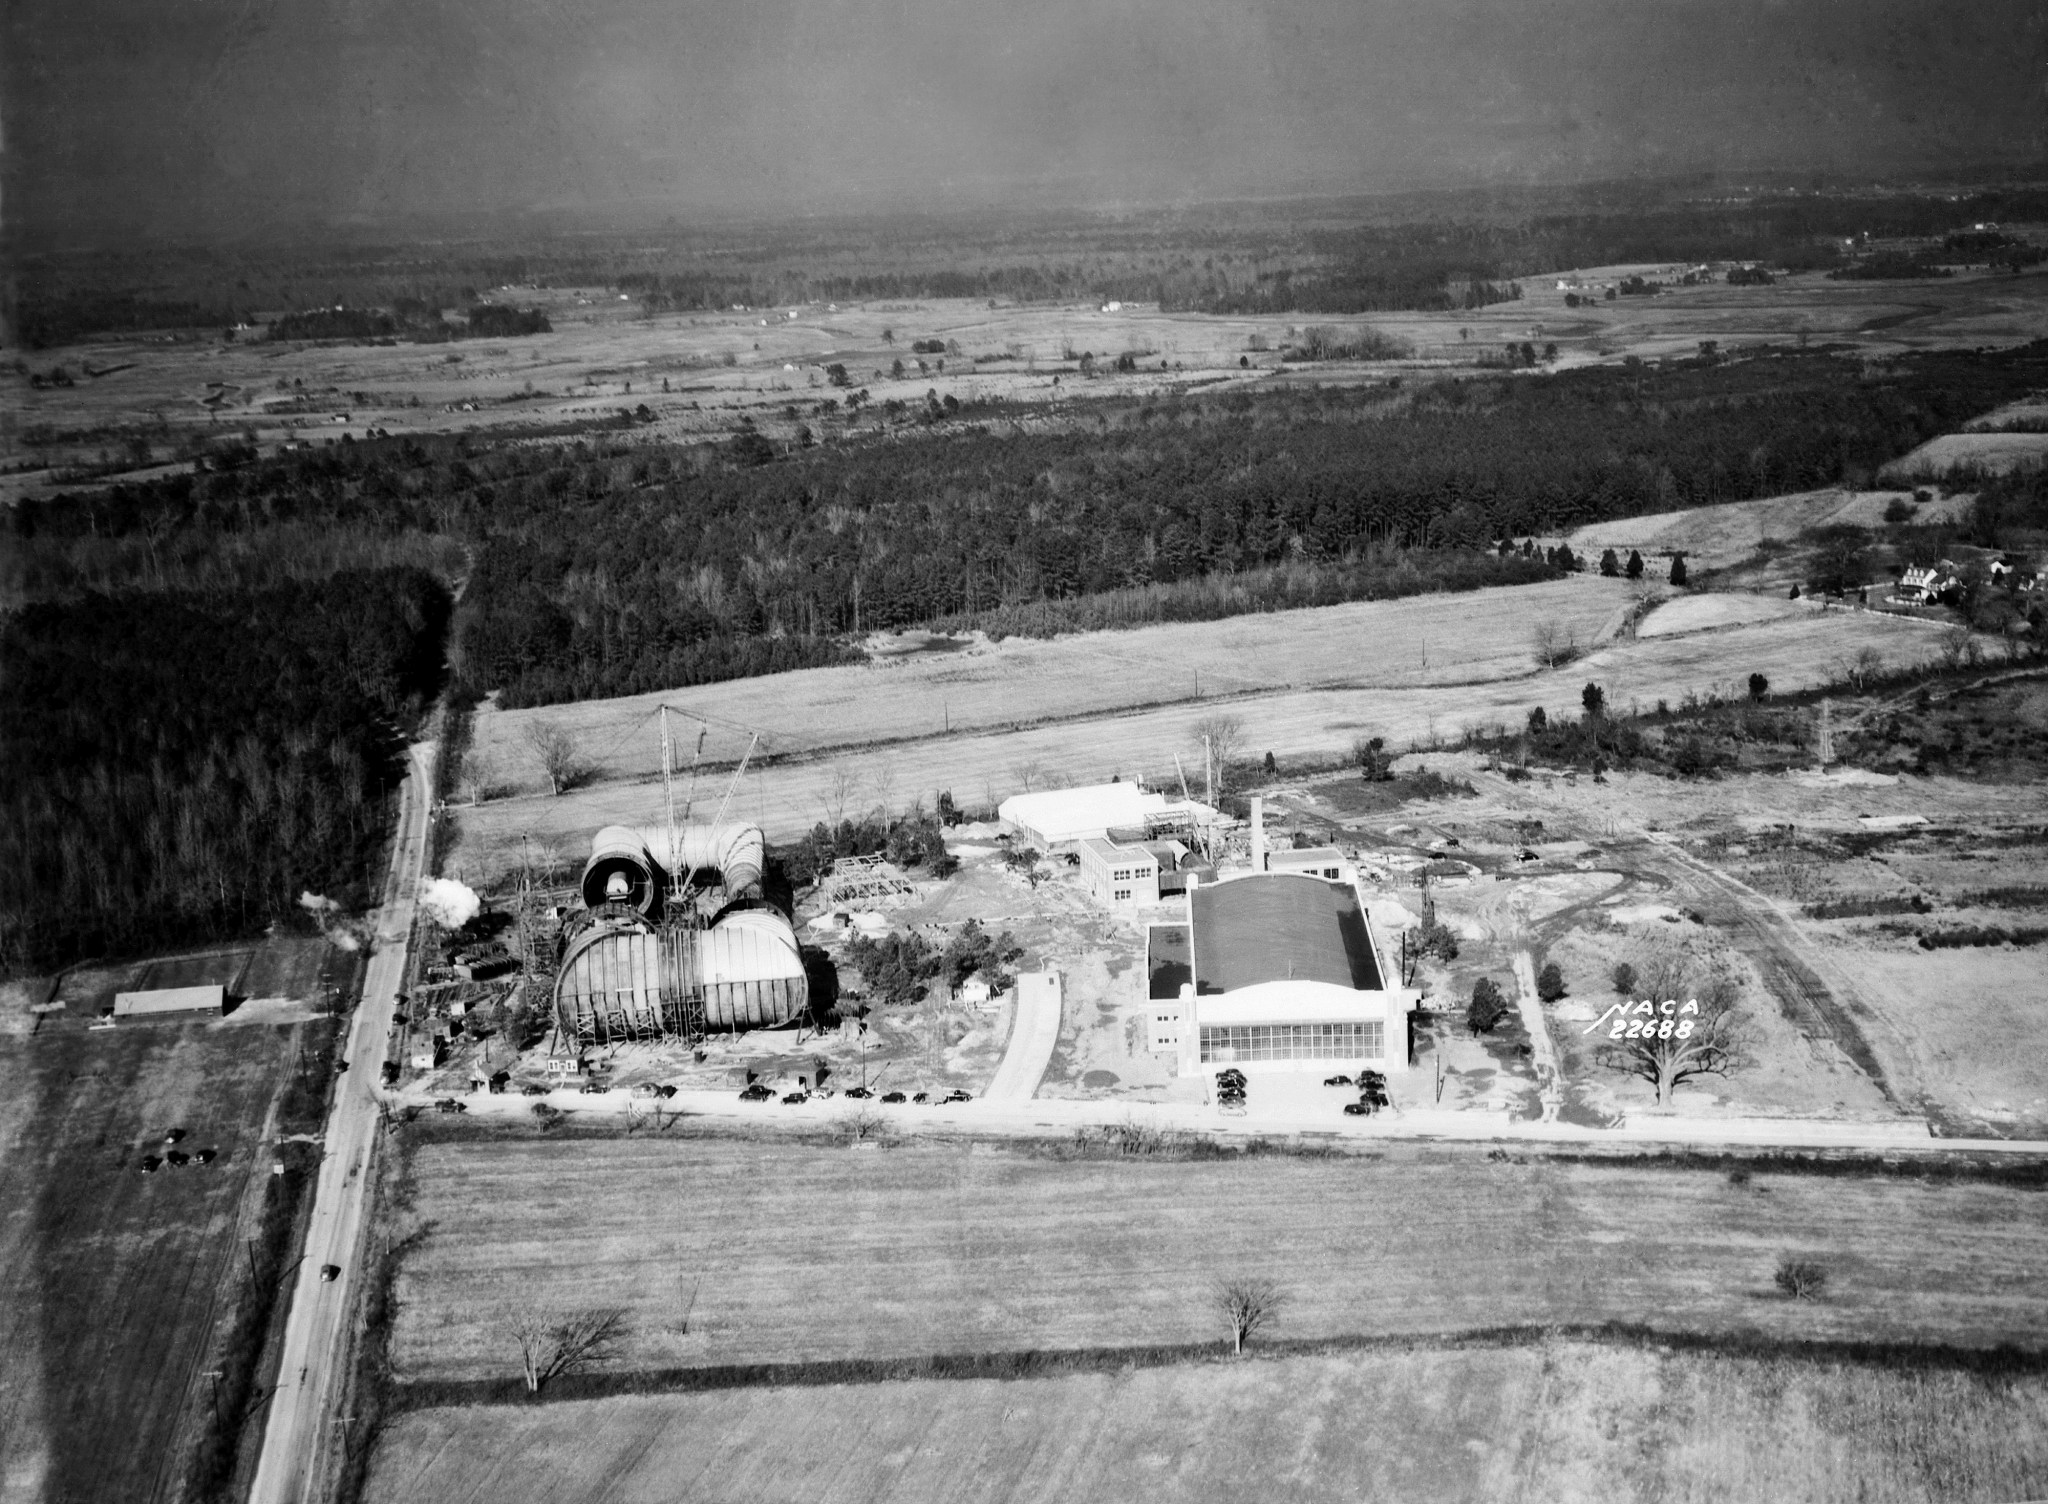 The ongoing construction of the 16-Foot Transonic Tunnel (on the left) can be seen in this aerial image from Jan. 4, 1941. NASA photo.